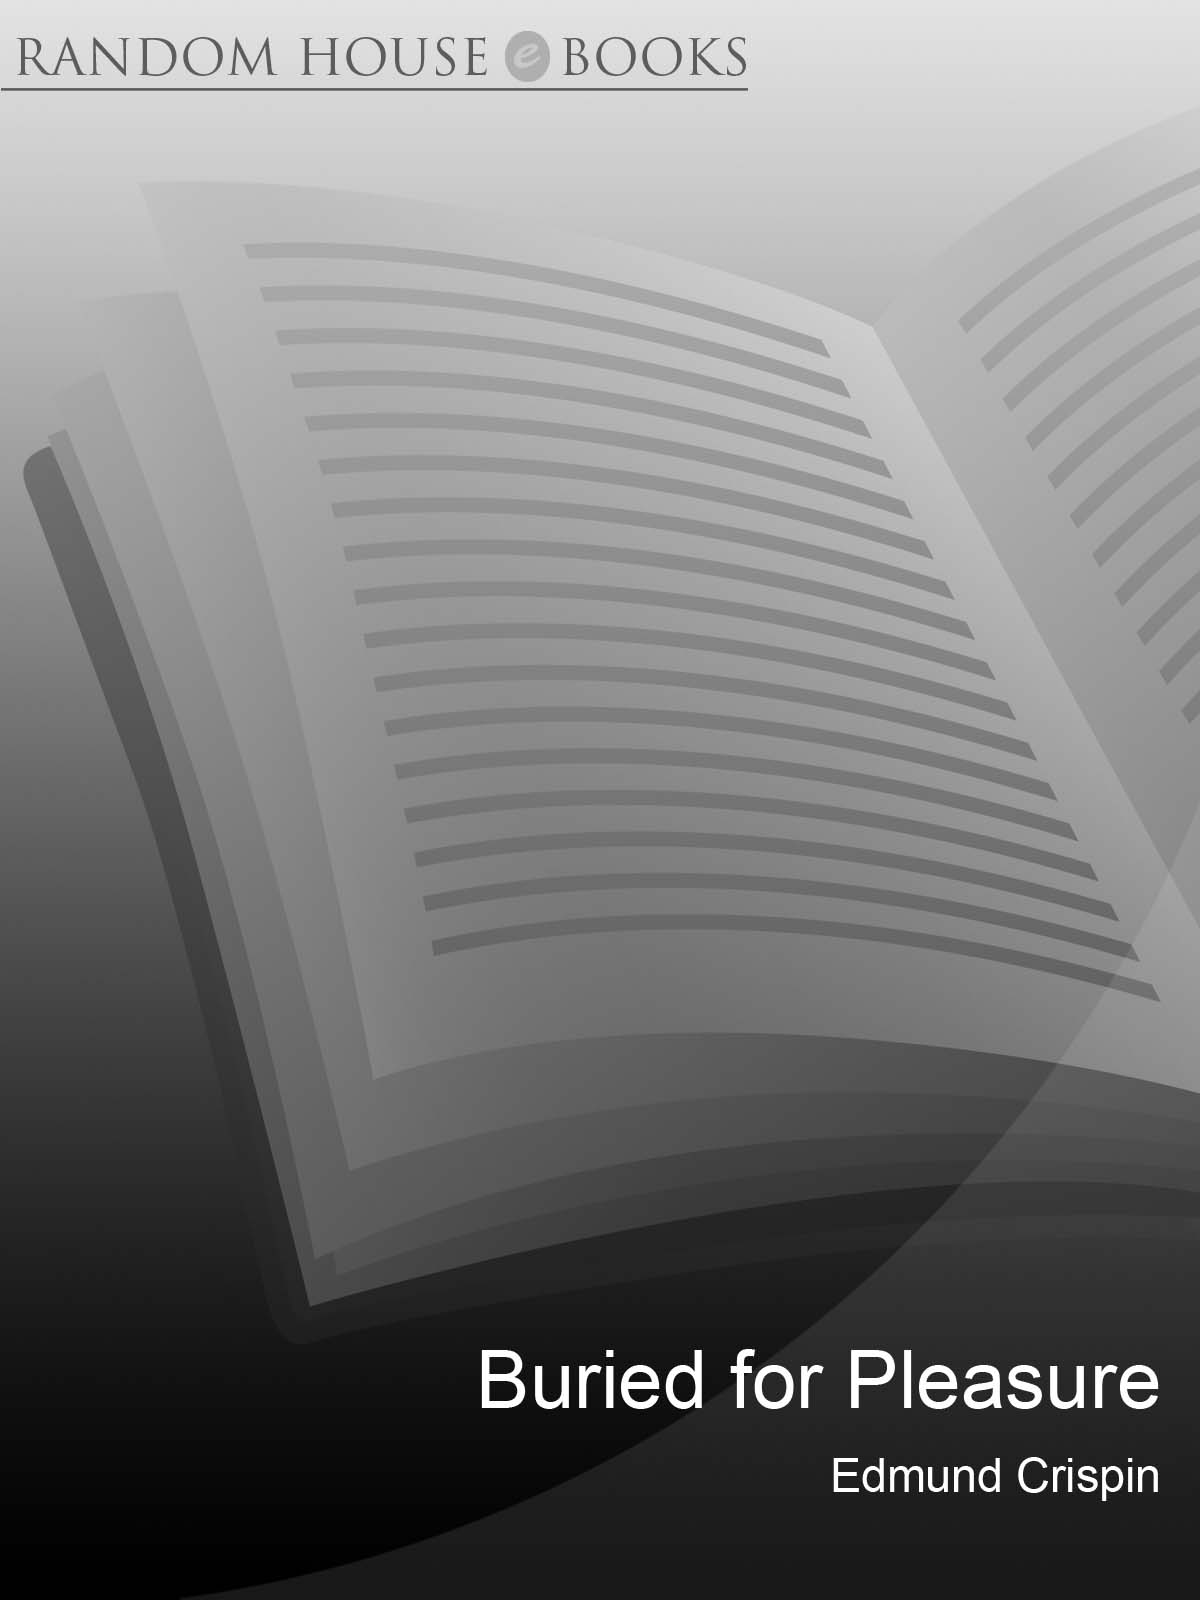 Buried for Pleasure (2009) by Edmund Crispin